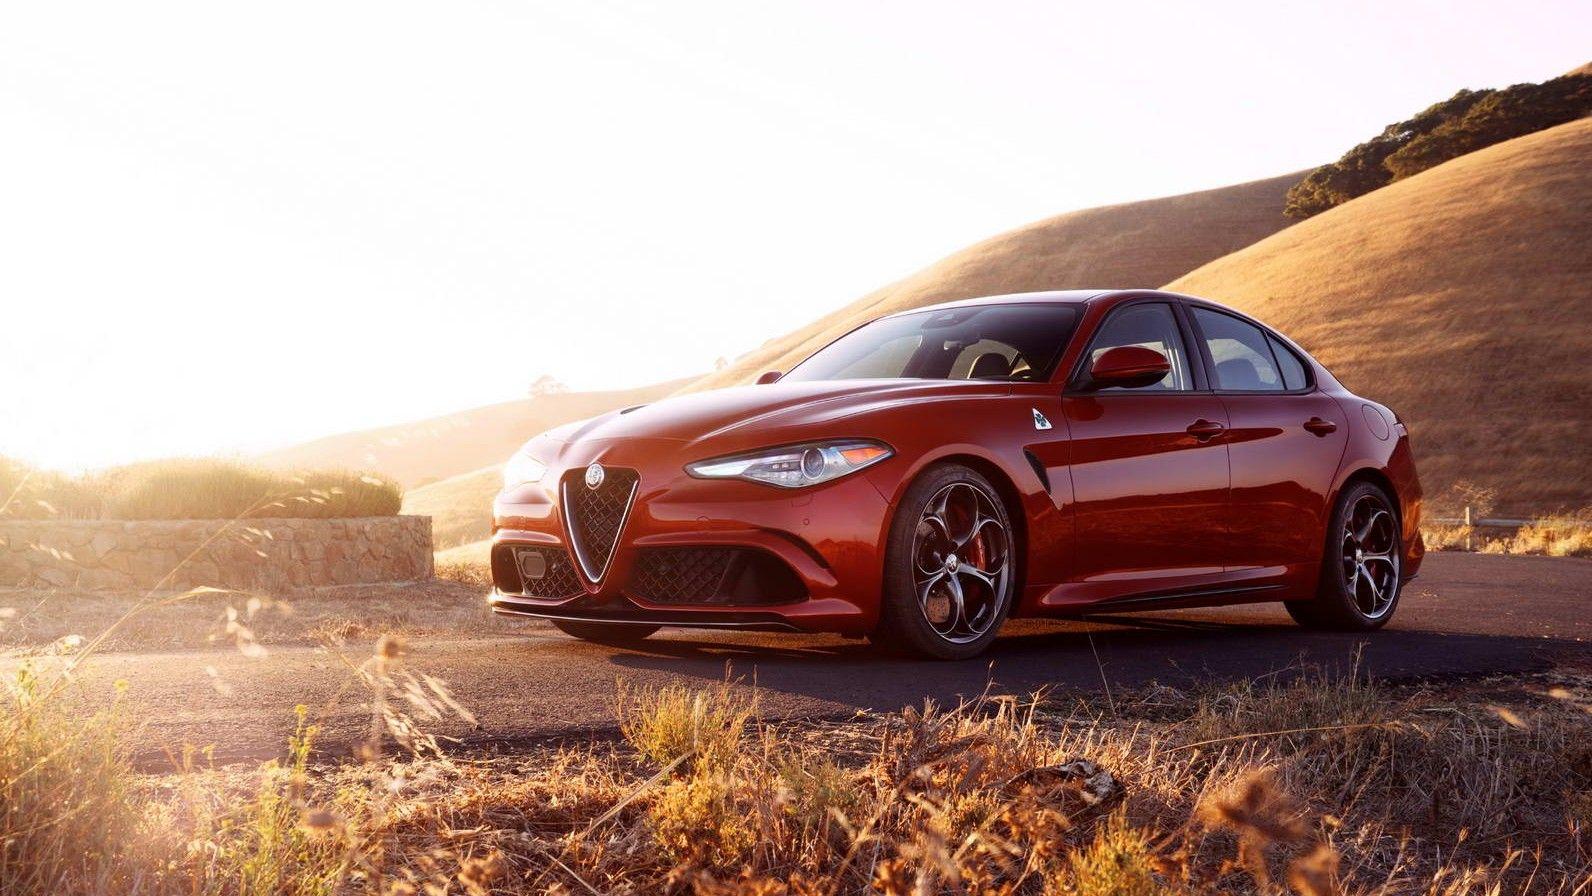 The Crazy Bph Rival of BMW M called Giulia QV